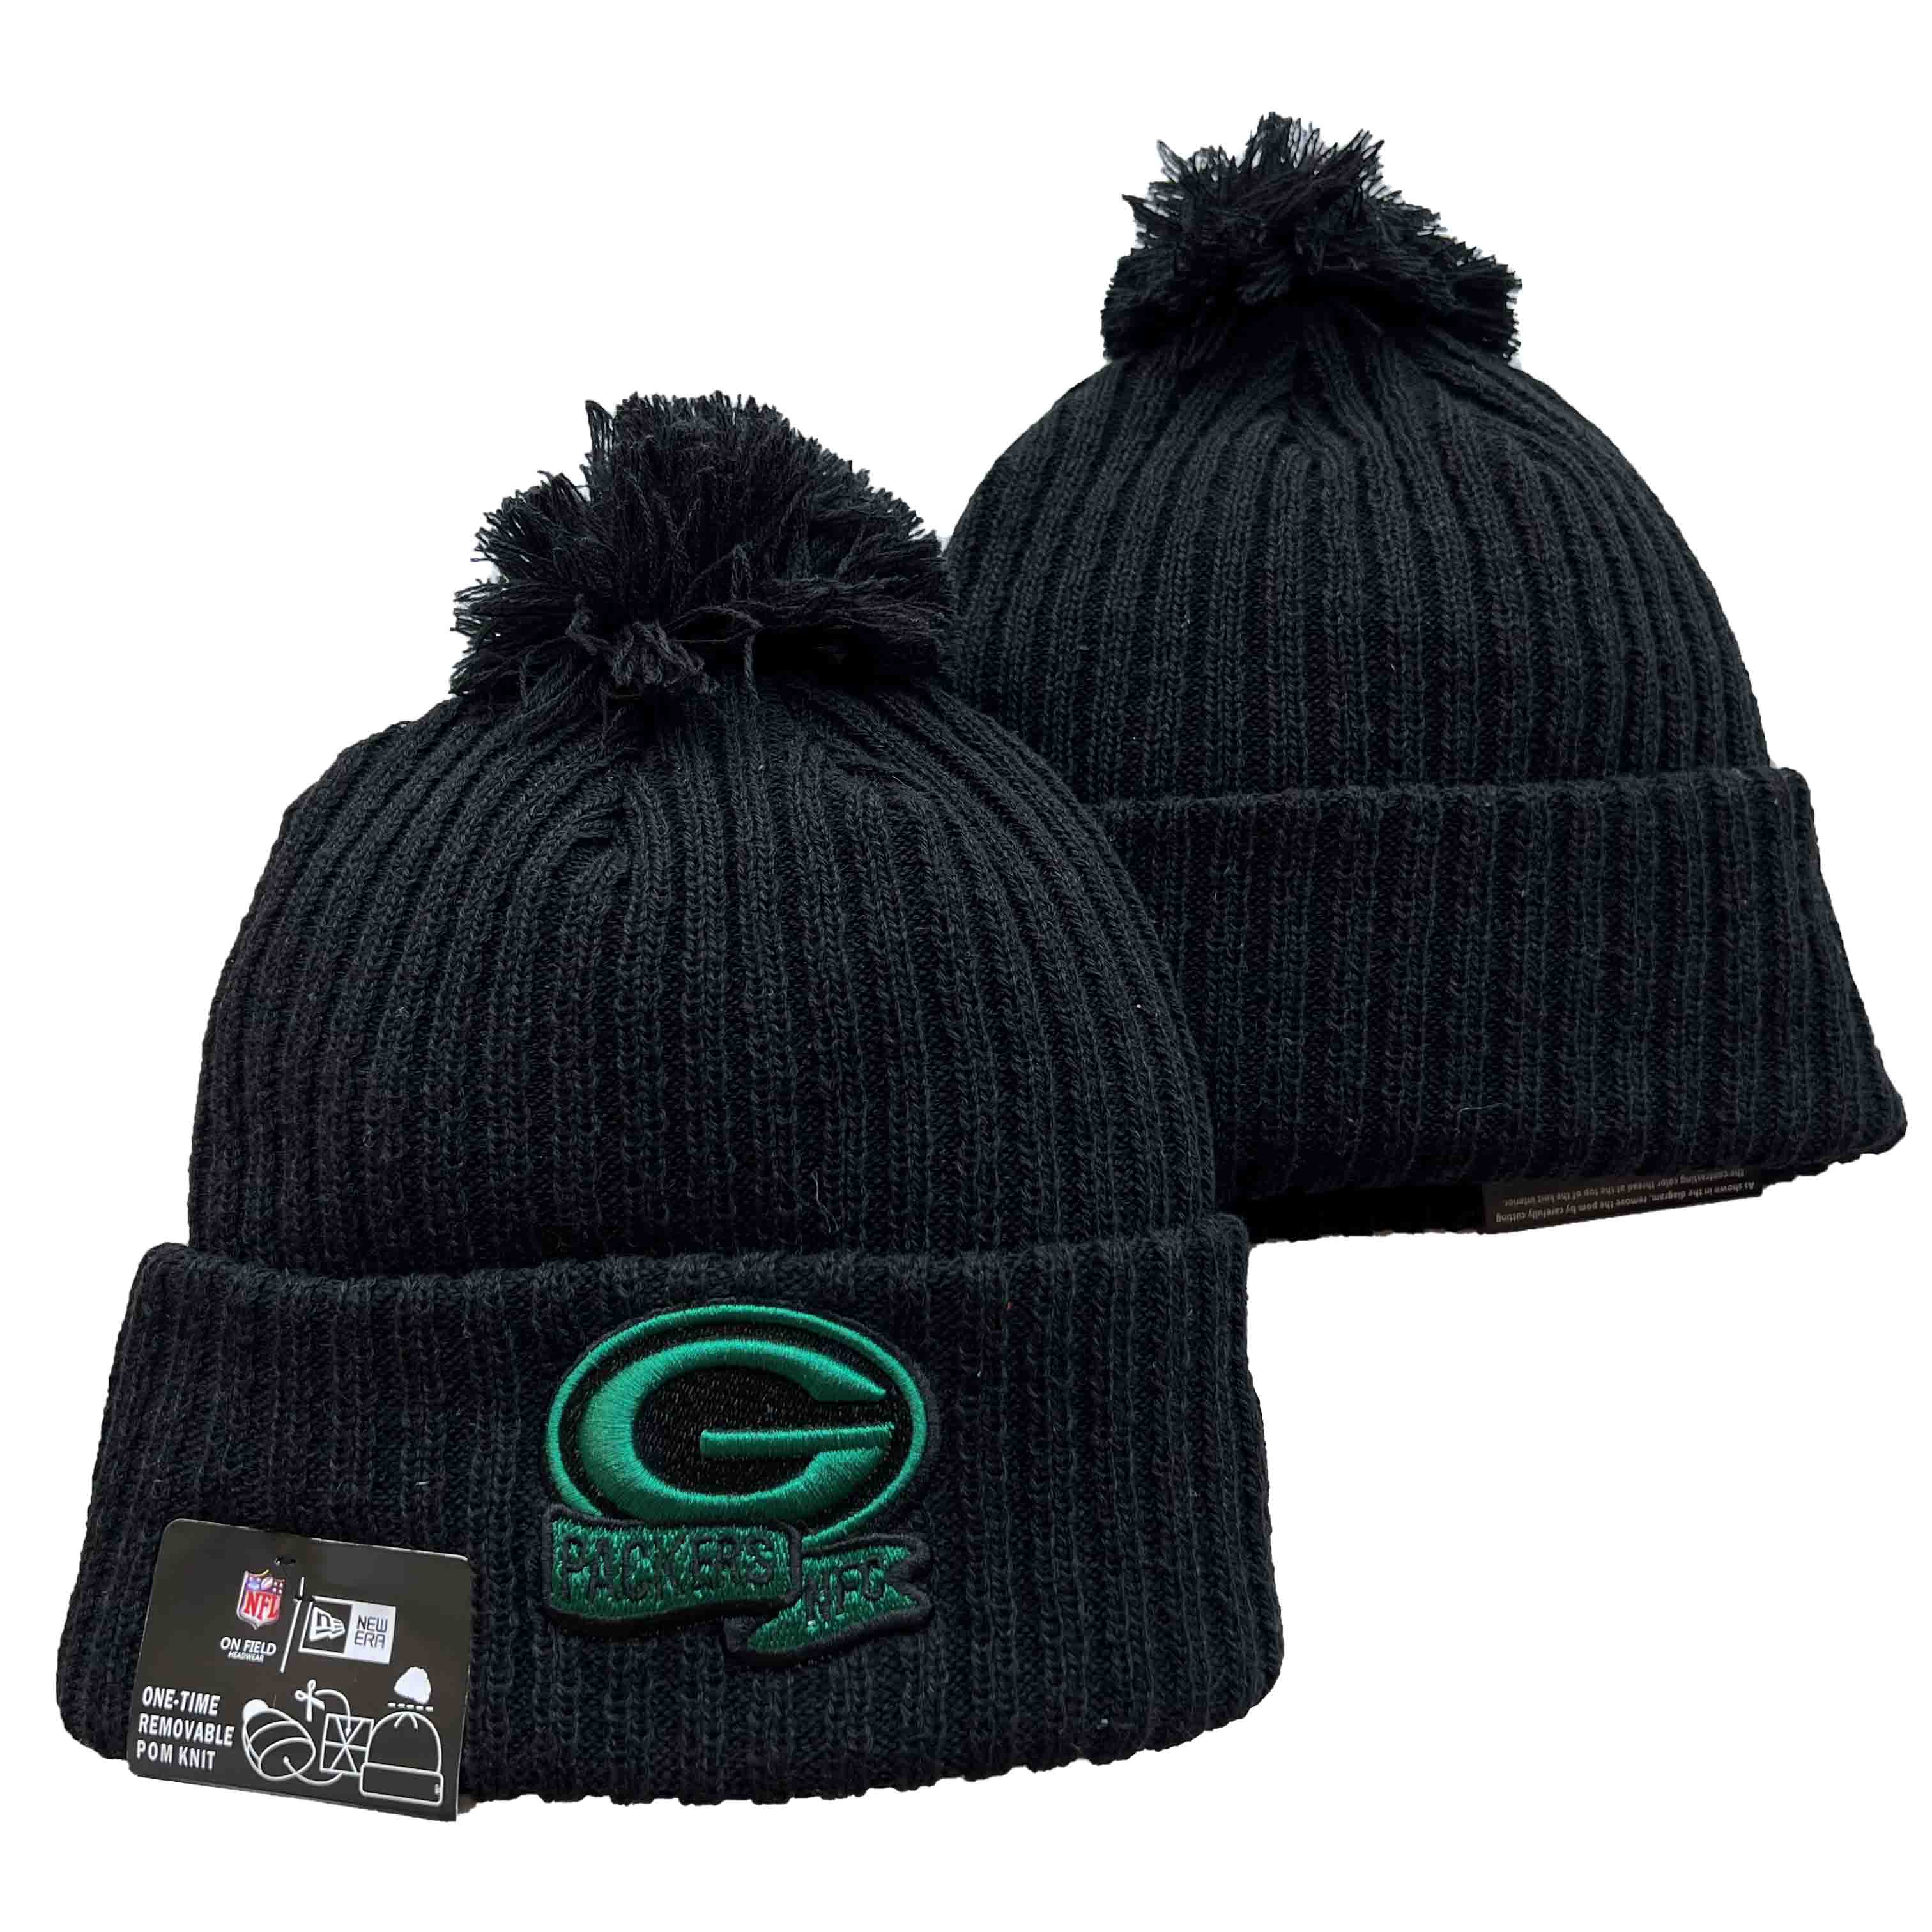 NFL Green Bay Packers Beanies Knit Hats-YD1176